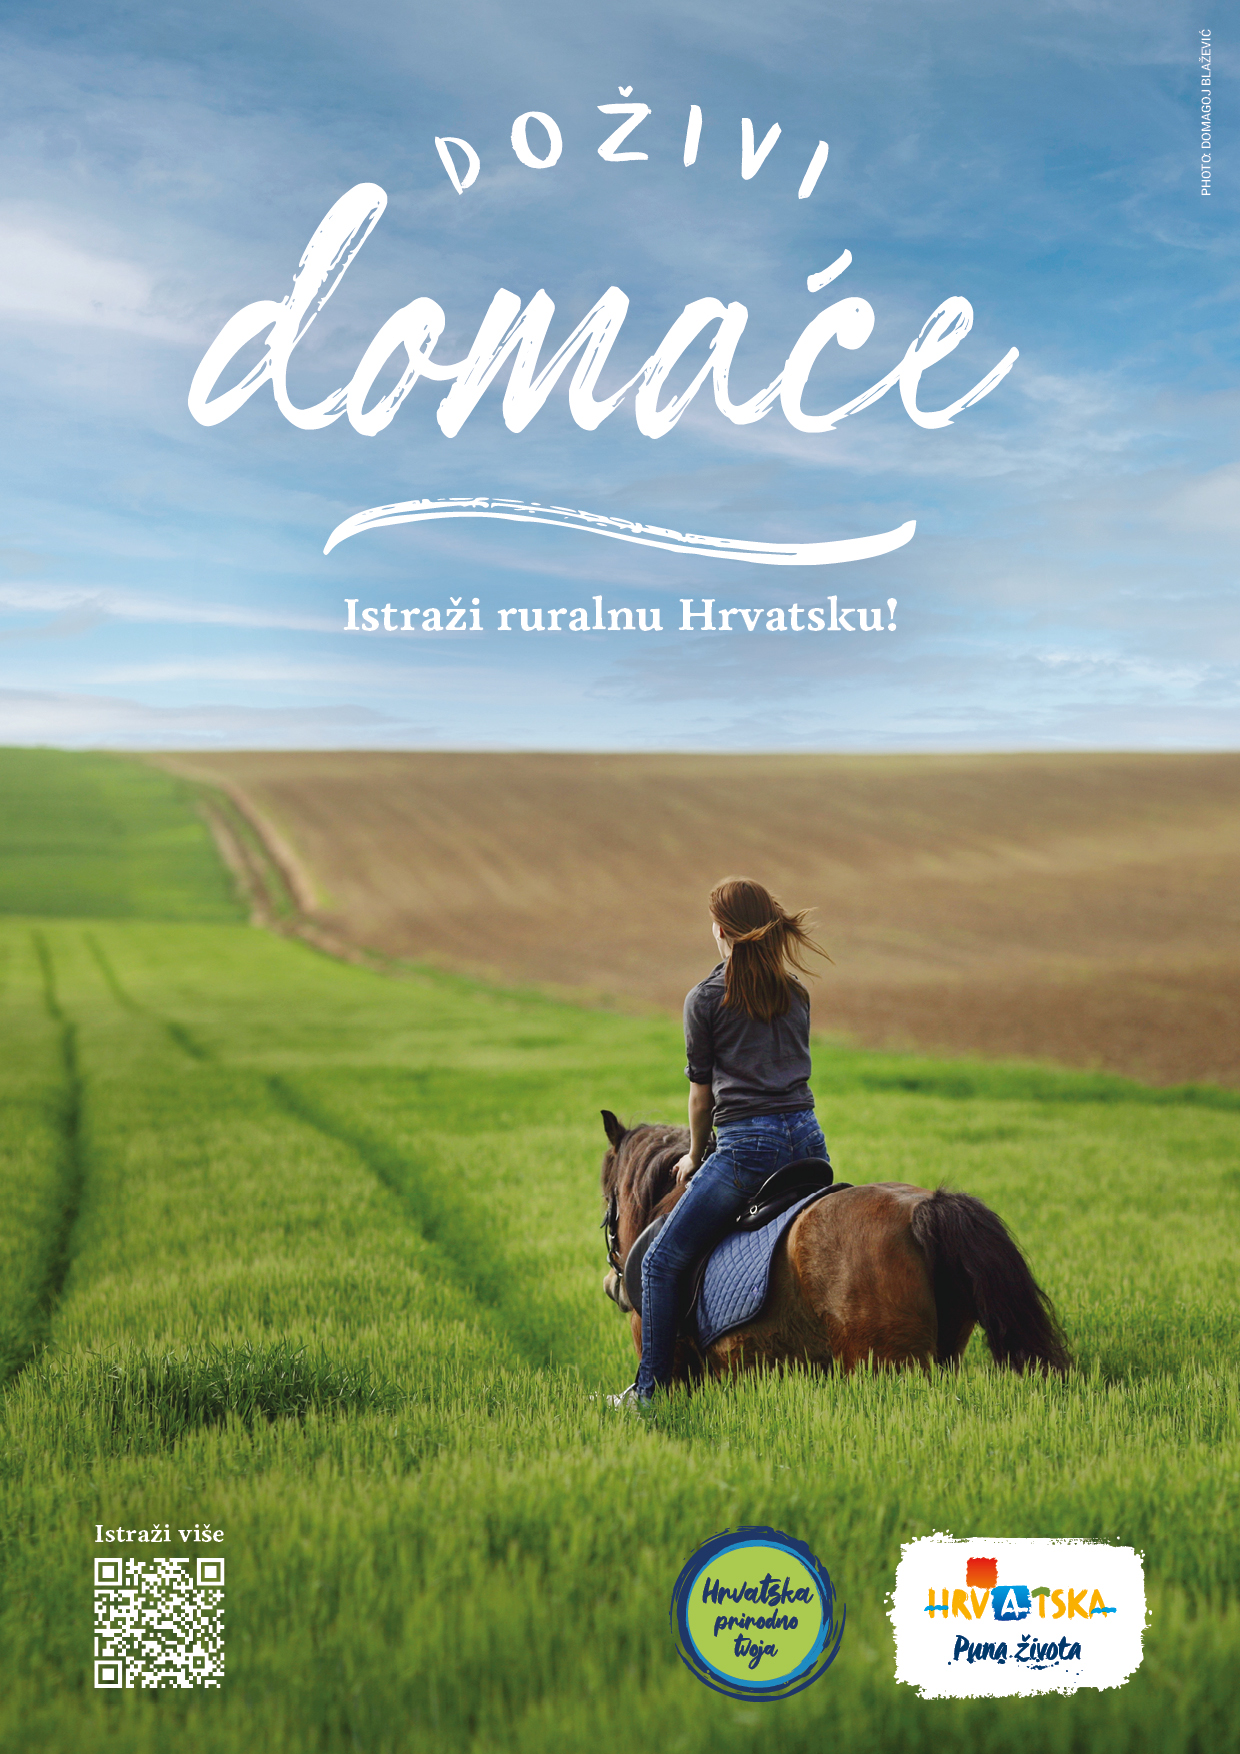  "Experience the locals. Explore the Croatian countryside! -Promotion of Croatian countryside destinations 